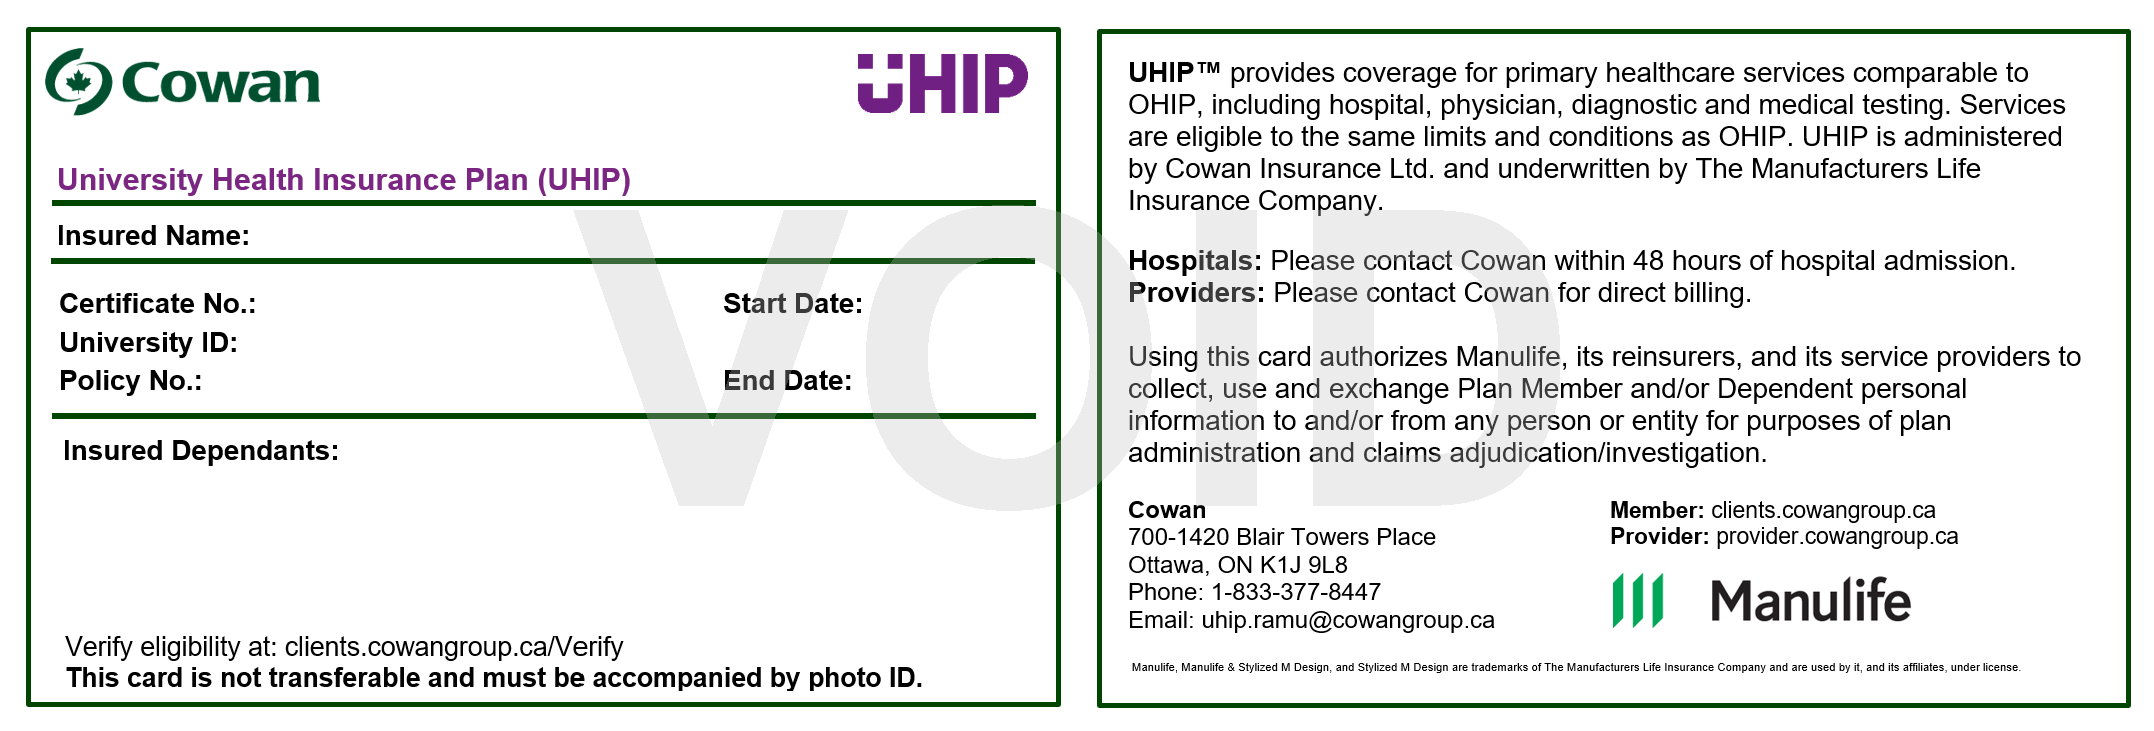 two sides of the COWAN UHIP card. The left side of the card includes the title “University Health Insurance Plan (UHIP) at the top, and below on this left side there are spaces for “certificate No.:”, “University ID”, “Policy No:.”. On the right next to these is a space for the start and end dates. If a student has dependents on their card, there is a space below this information where any dependents would be listed. At the bottom of this side is the text "verify eligibility at: clients.cowangroup.ca/Verify", and below it the text: "This card is not transferable and must be accompanied by photo ID". The right side is the other side of the UHIP card includes the following information about UHIP: "UHIP provides coverage for primary healthcare services comparable to OHIP, including hospital, physician, diagnostic and medical testing. Services are eligible to the same limits and conditions as OHIP. UHIP is administered by Cowan Insurance Ltd. and underwritten by The Manufacturers Life Insurance Company". Below this is "hospitals:" in bold, and next to it the text: "please contact Cowan within 48 hours of hospital admission. The word "providers:" is also bolded with the following information: "please contact Cowan for direct billing". Below these is the text "using this card authorized Manulife, its reinsurers, and its service providers to collect, use and exchange Plan Member and/or Dependent personal information to and/or from any person or entity for purposes of plan administration and claims adjudication/Investigation". On the bottom left of this side of the card, Cowan’s address and contact information is listed.